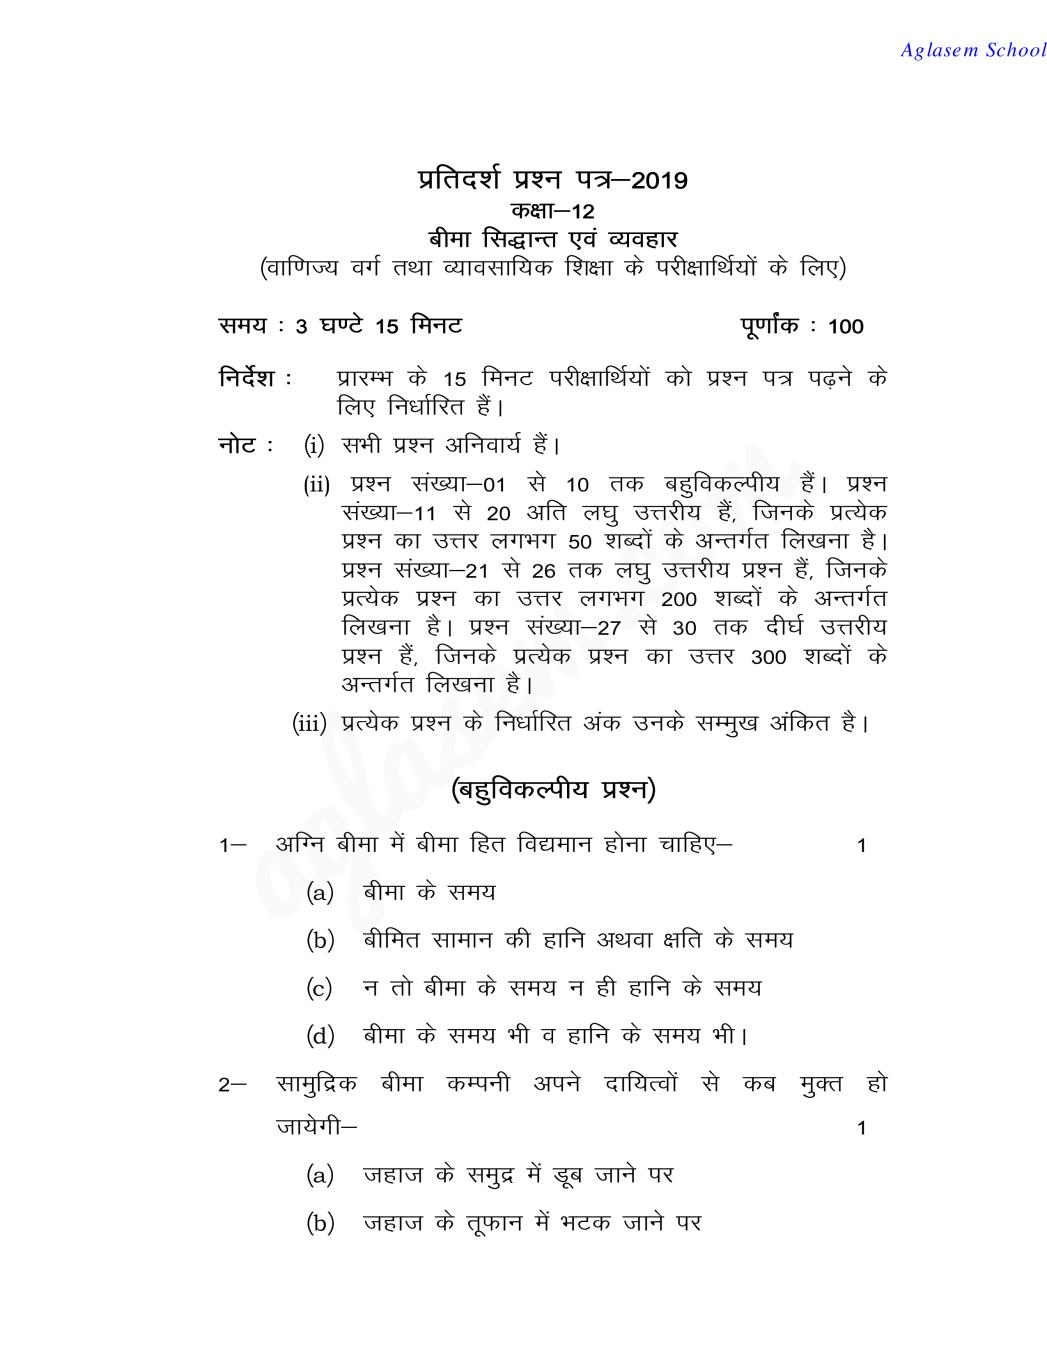 UP Board Class 12 Model Paper 2019 INSURANCE POLICY - Page 1